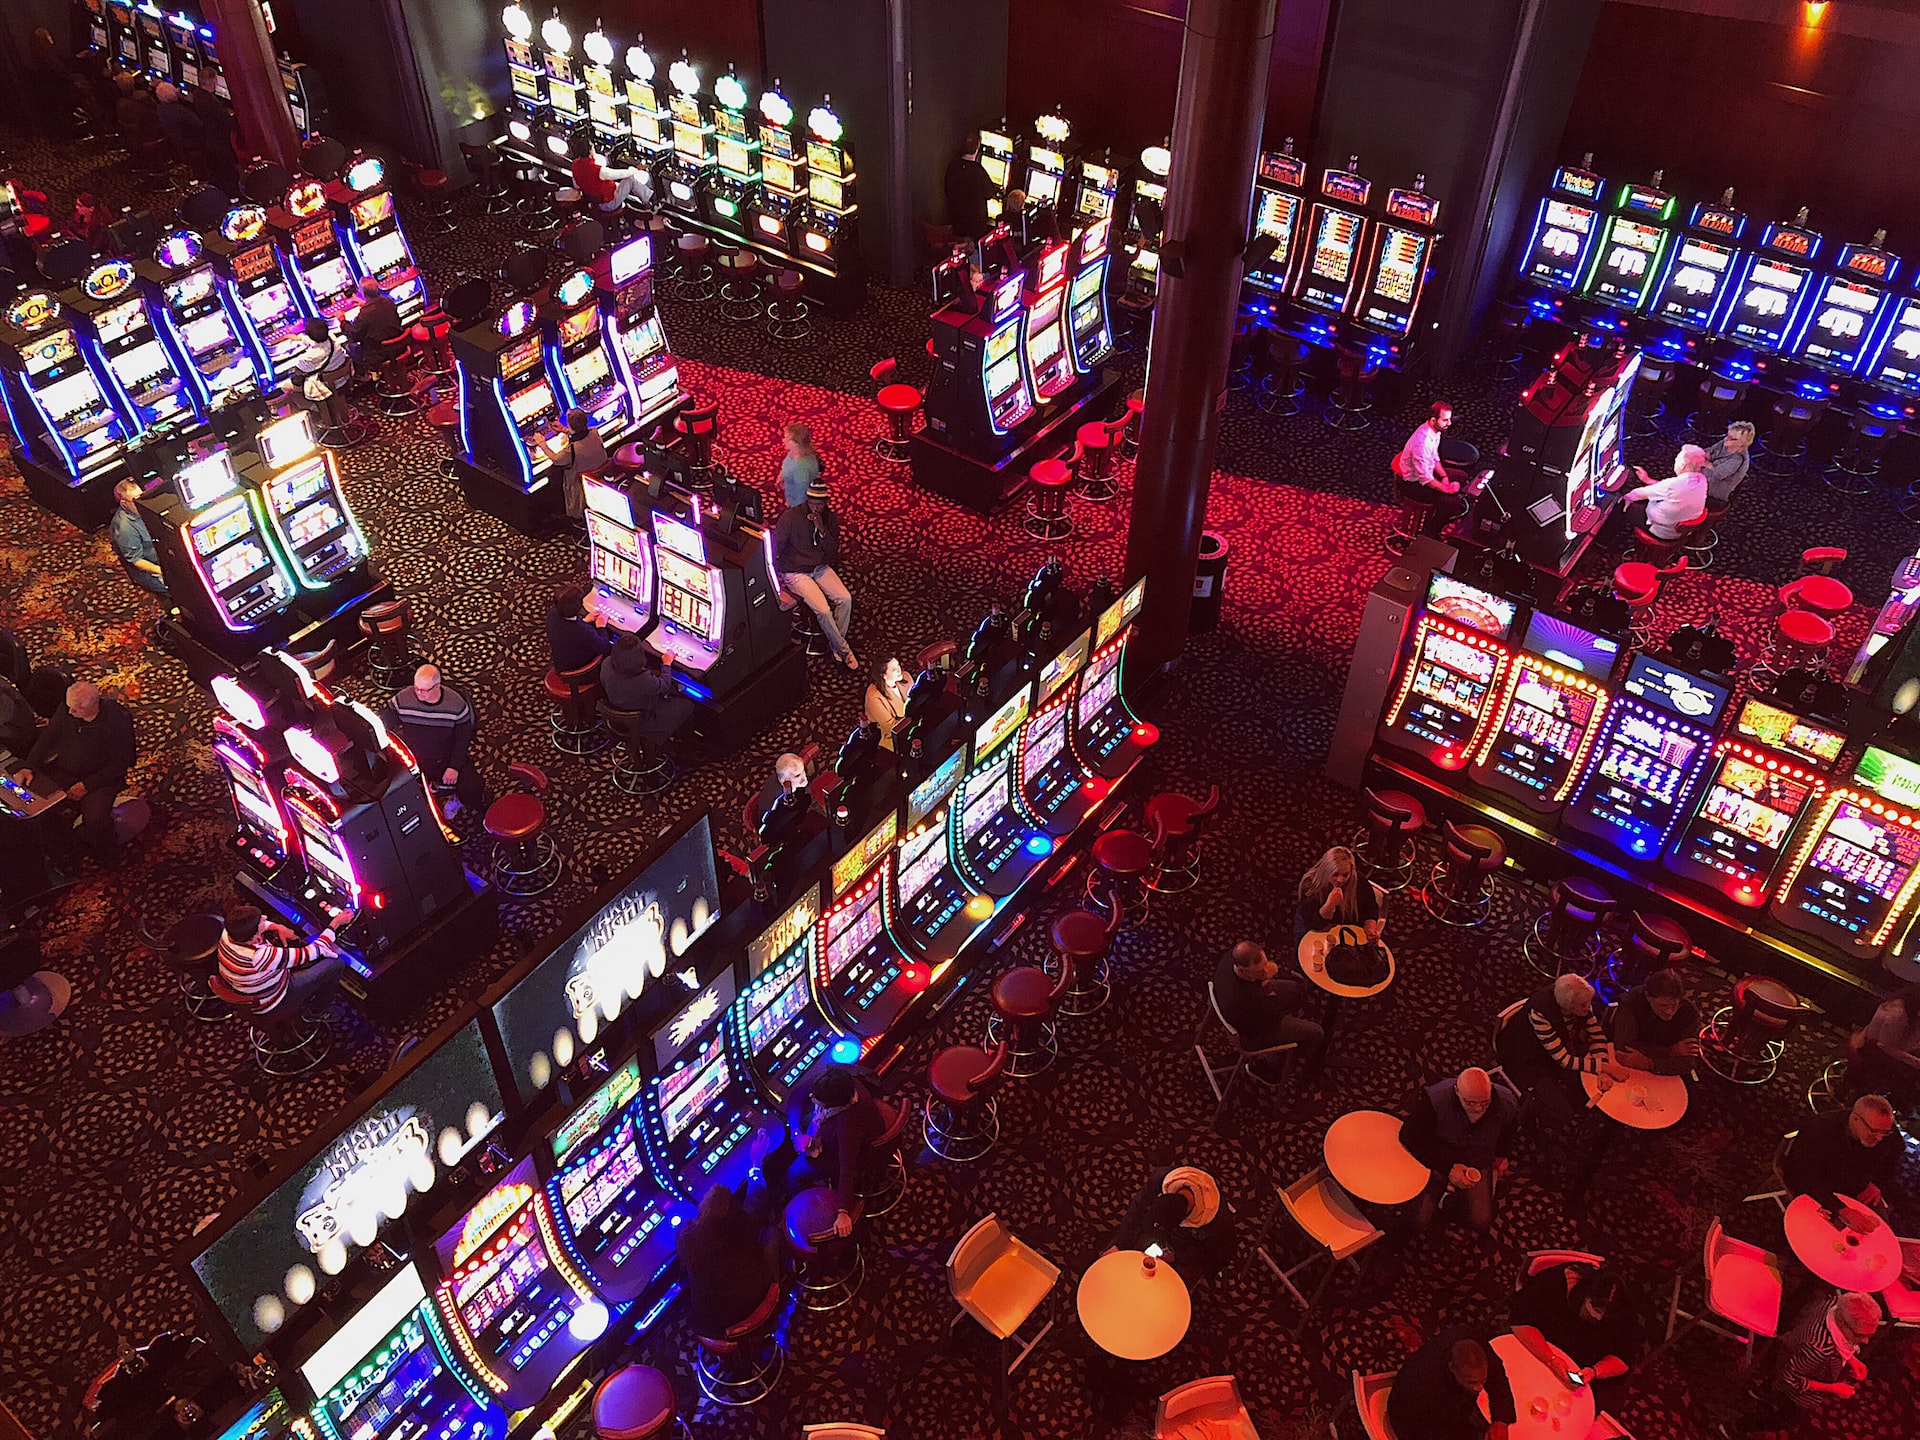 A sky view of several people playing slot machine games in a casino